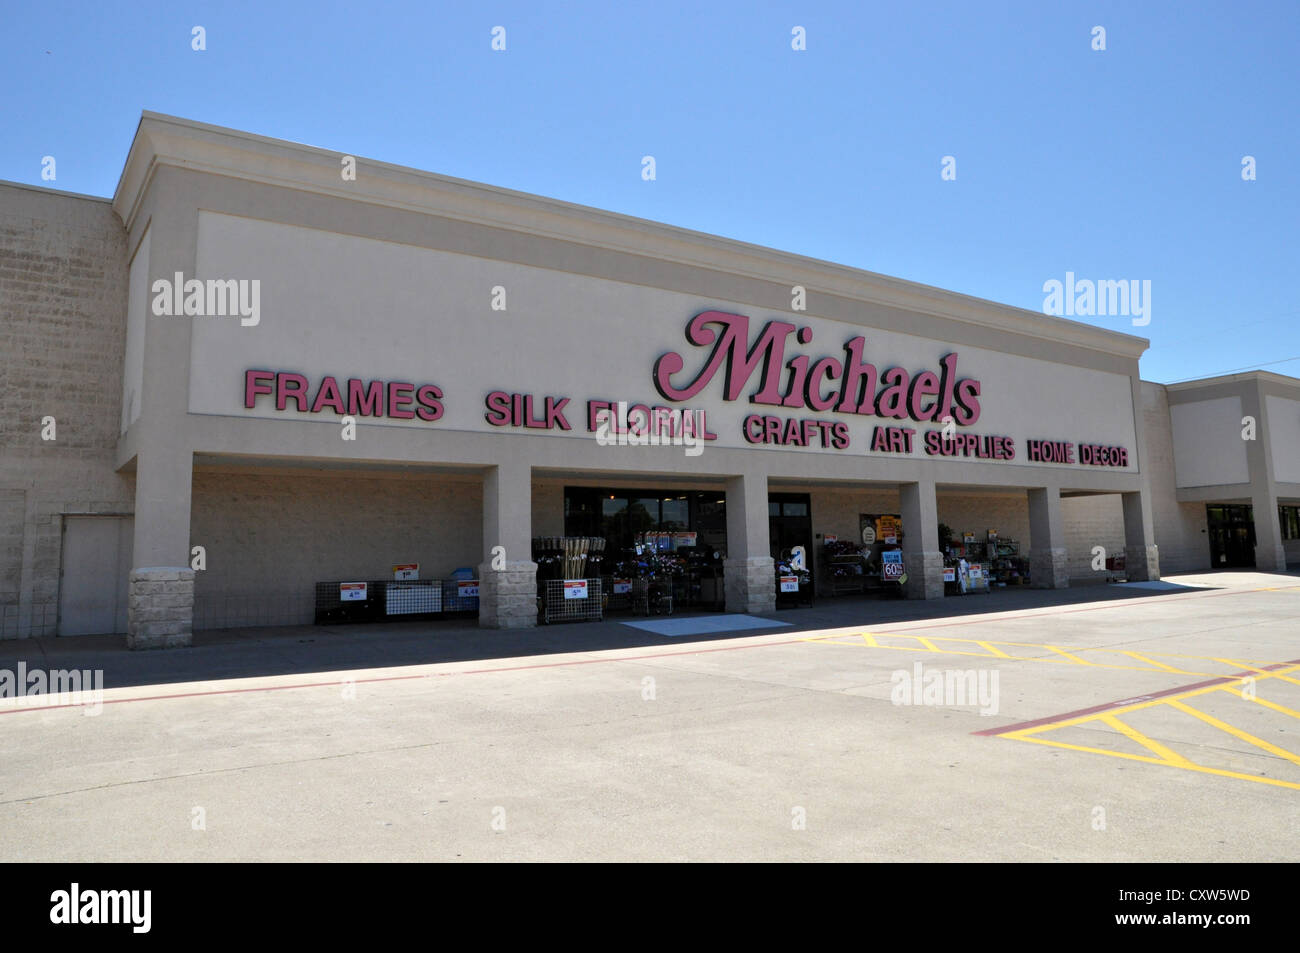 https://c8.alamy.com/comp/CXW5WD/the-michaels-store-in-longview-texas-is-open-for-business-in-2012-CXW5WD.jpg